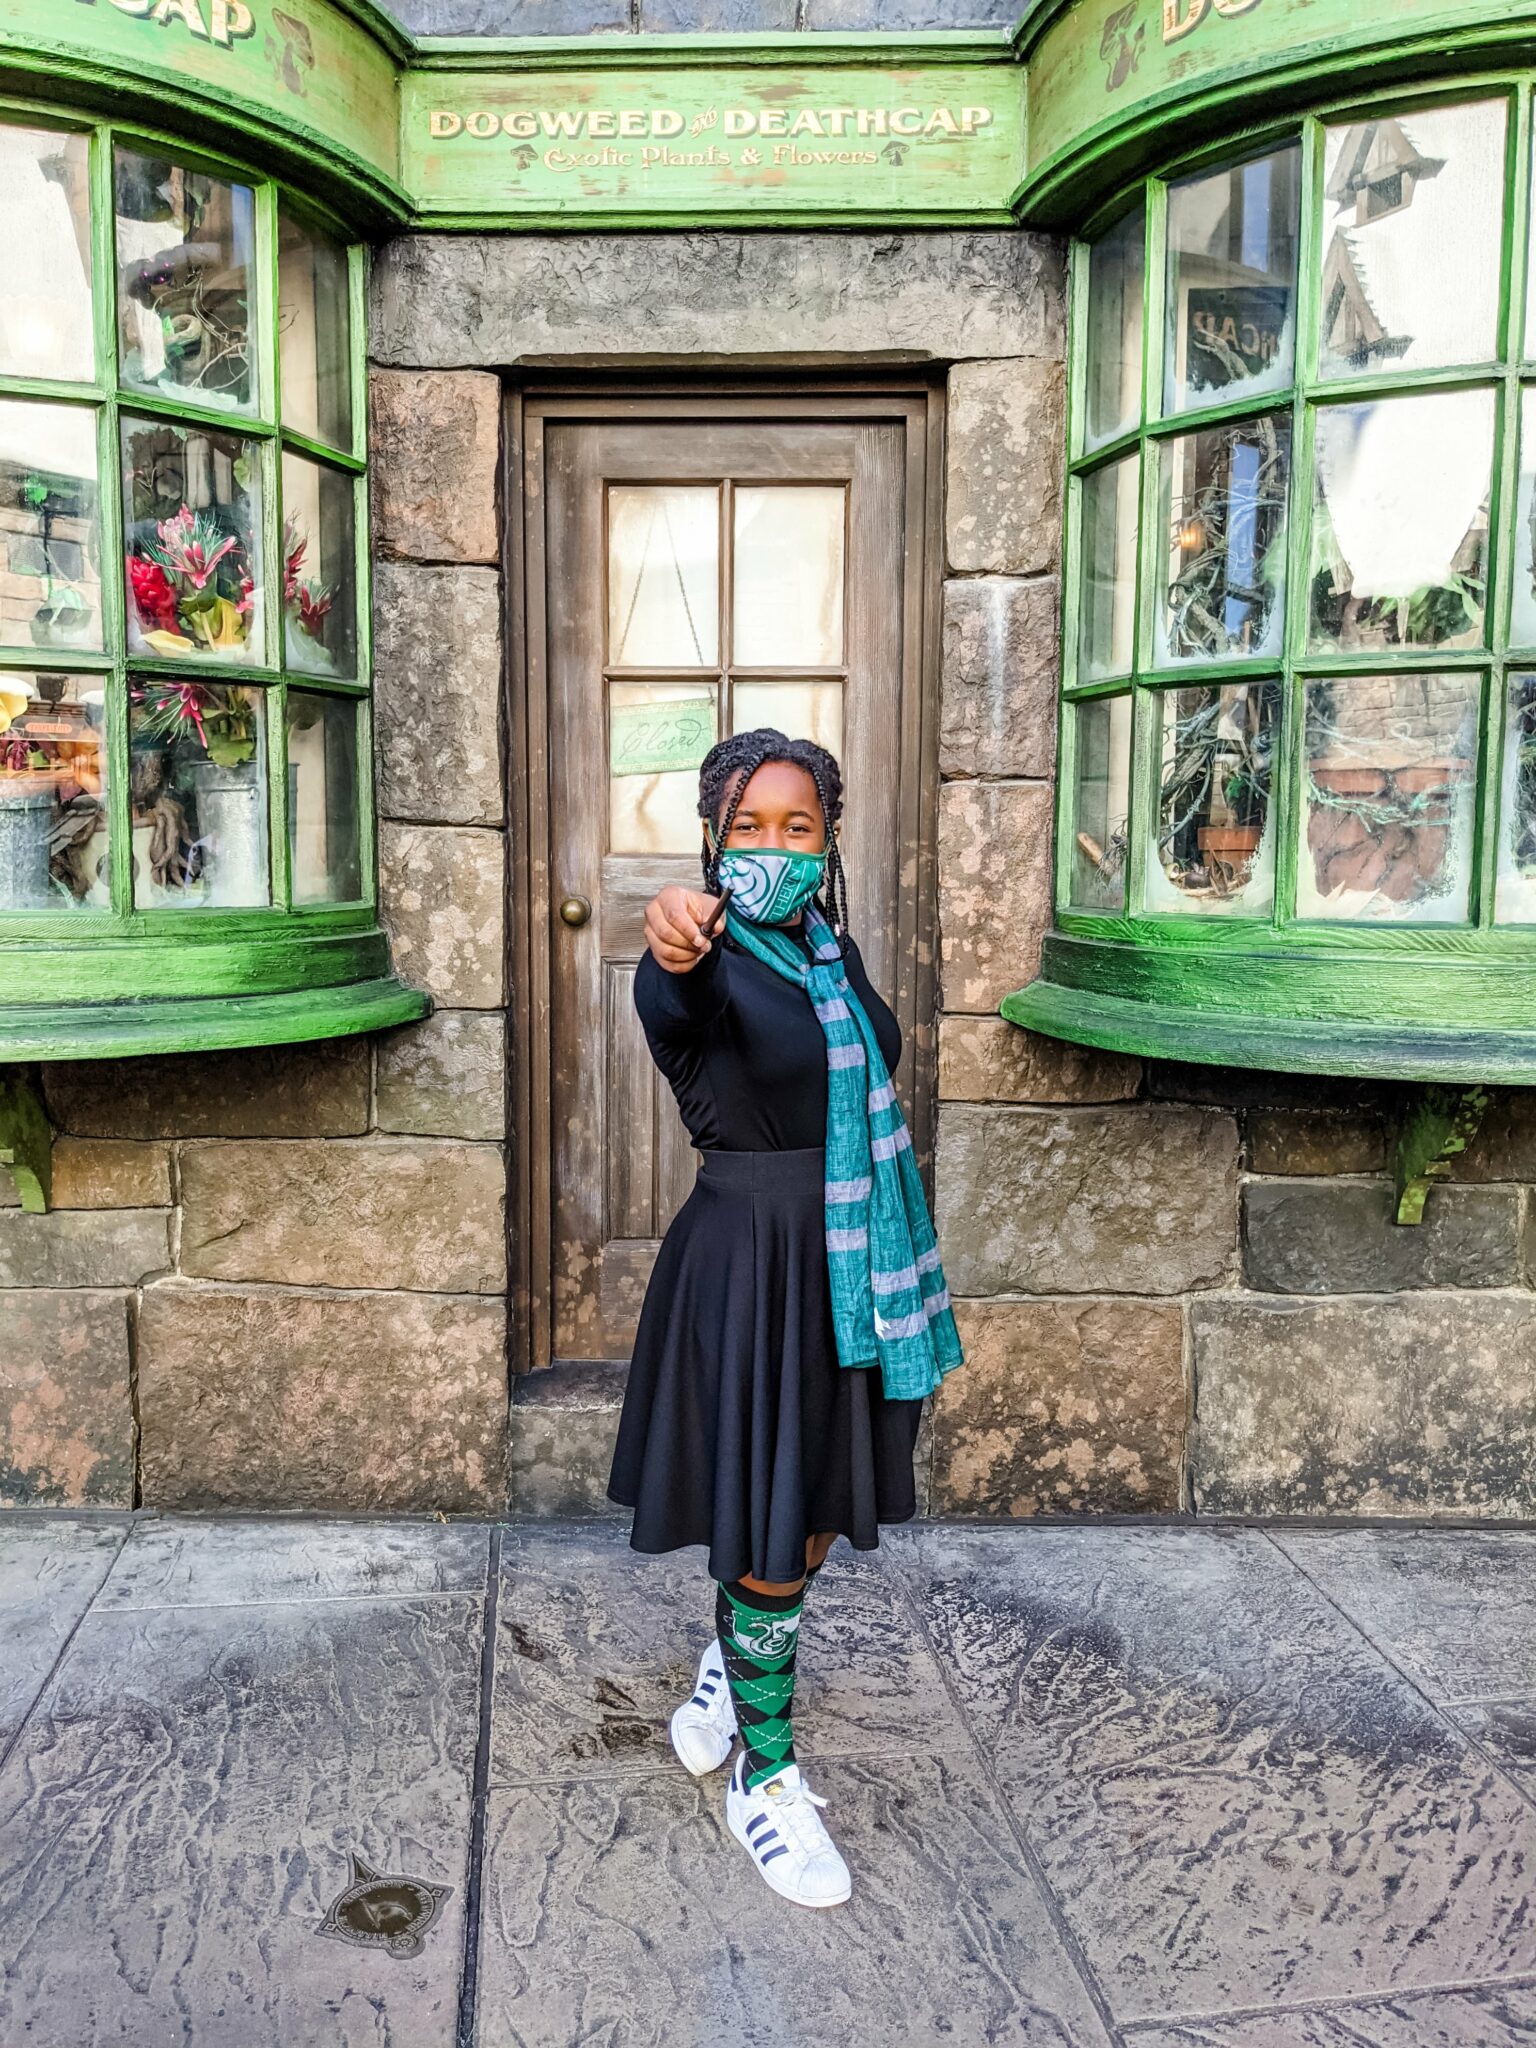 Best Photo Spots at Universal Studios Florida All Things with Purpose Sarah Lemp 54